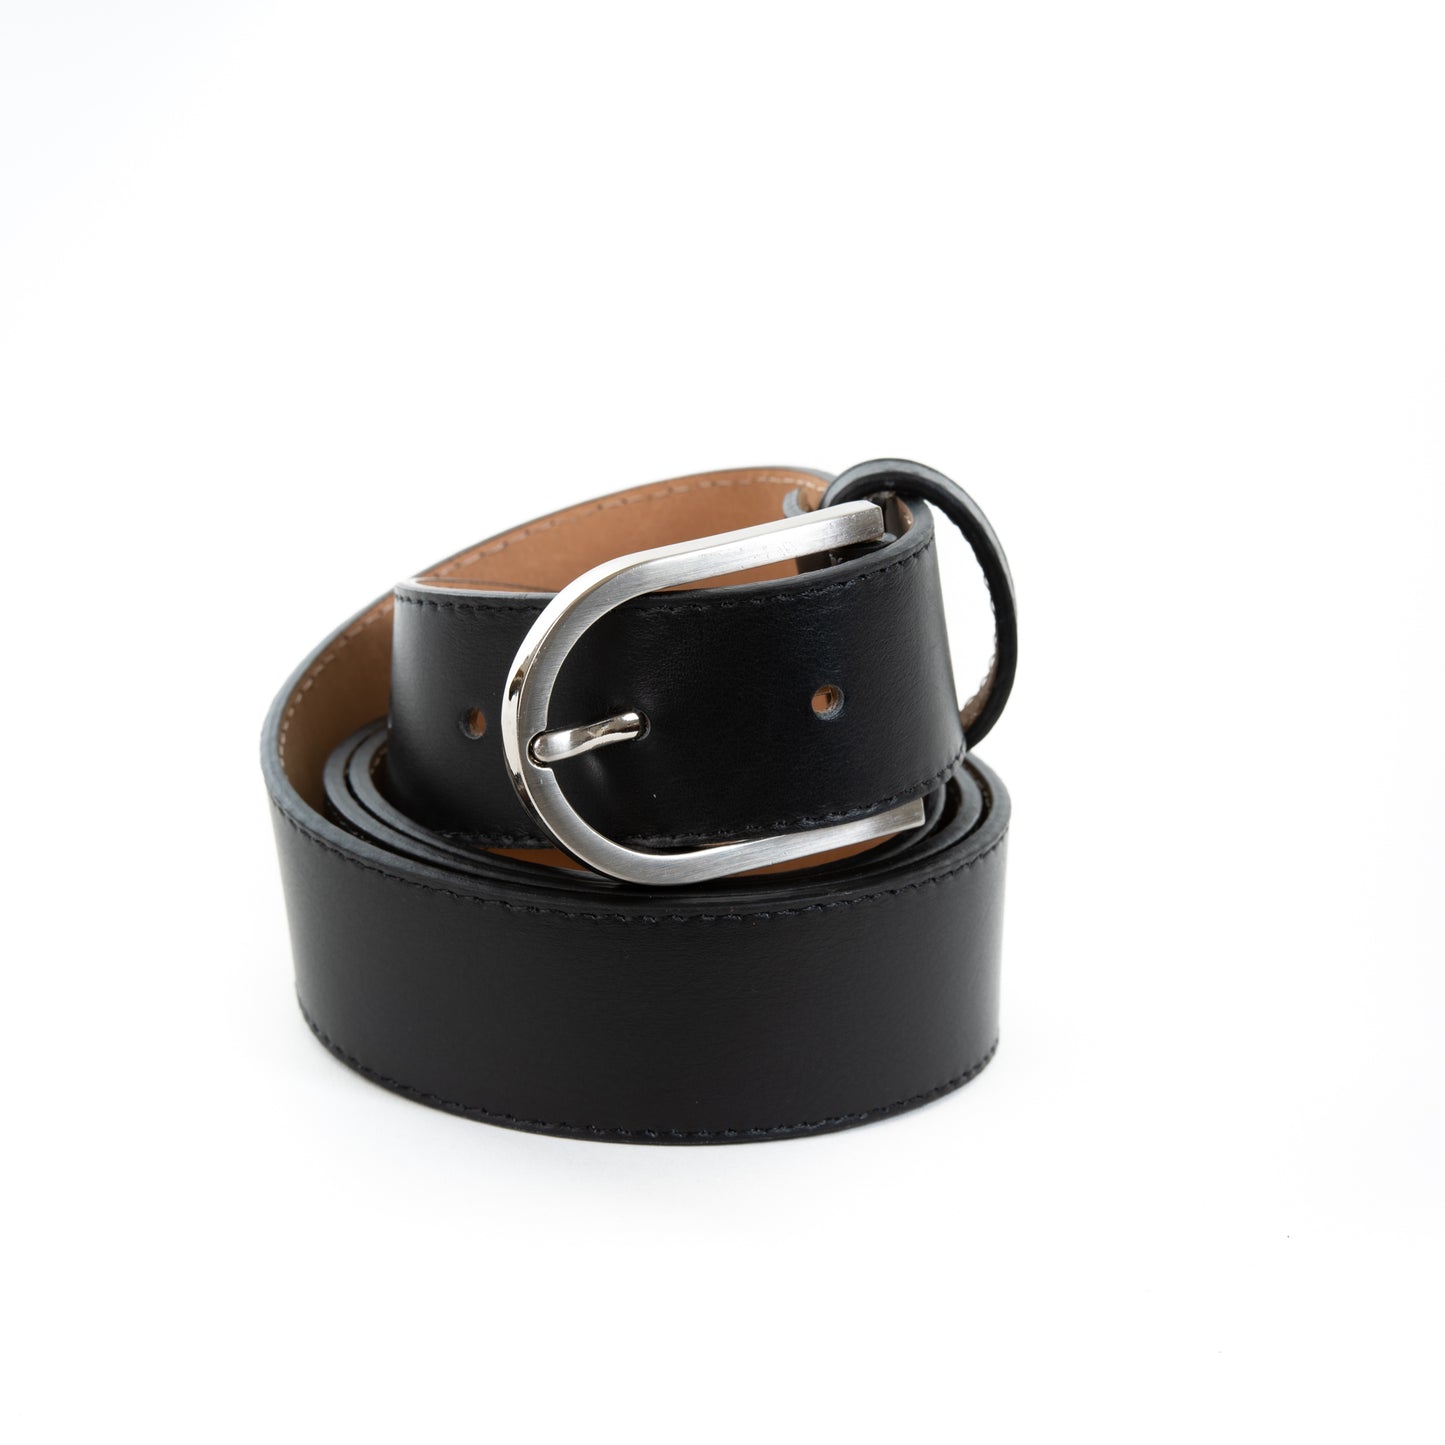 Navy Real Italian Leather Wide Belt Pack of Two - Amilu